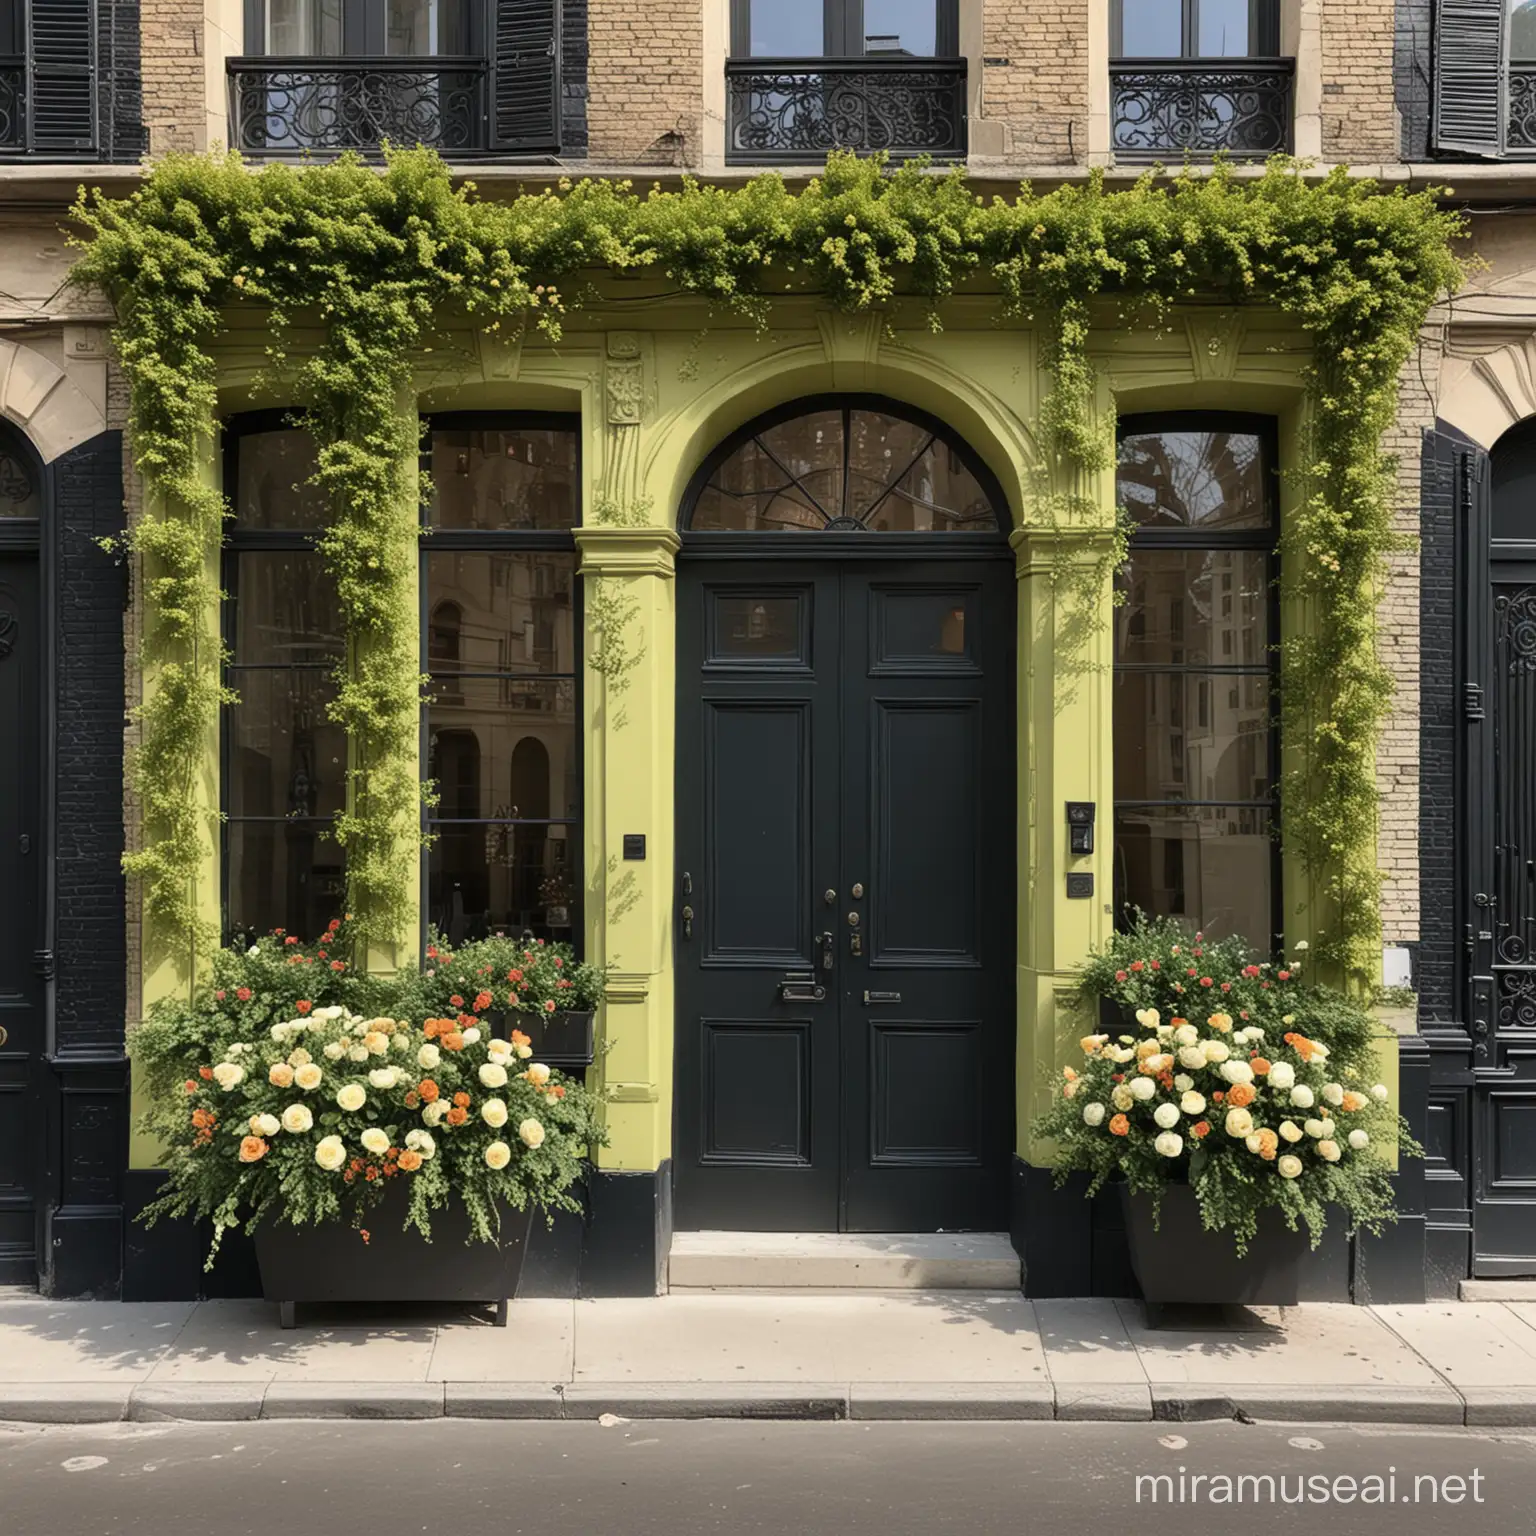 Parisian Architecture Commercial Building with Citron Green Door and Chalk Black Brick Exterior Surrounded by Floral Landscape